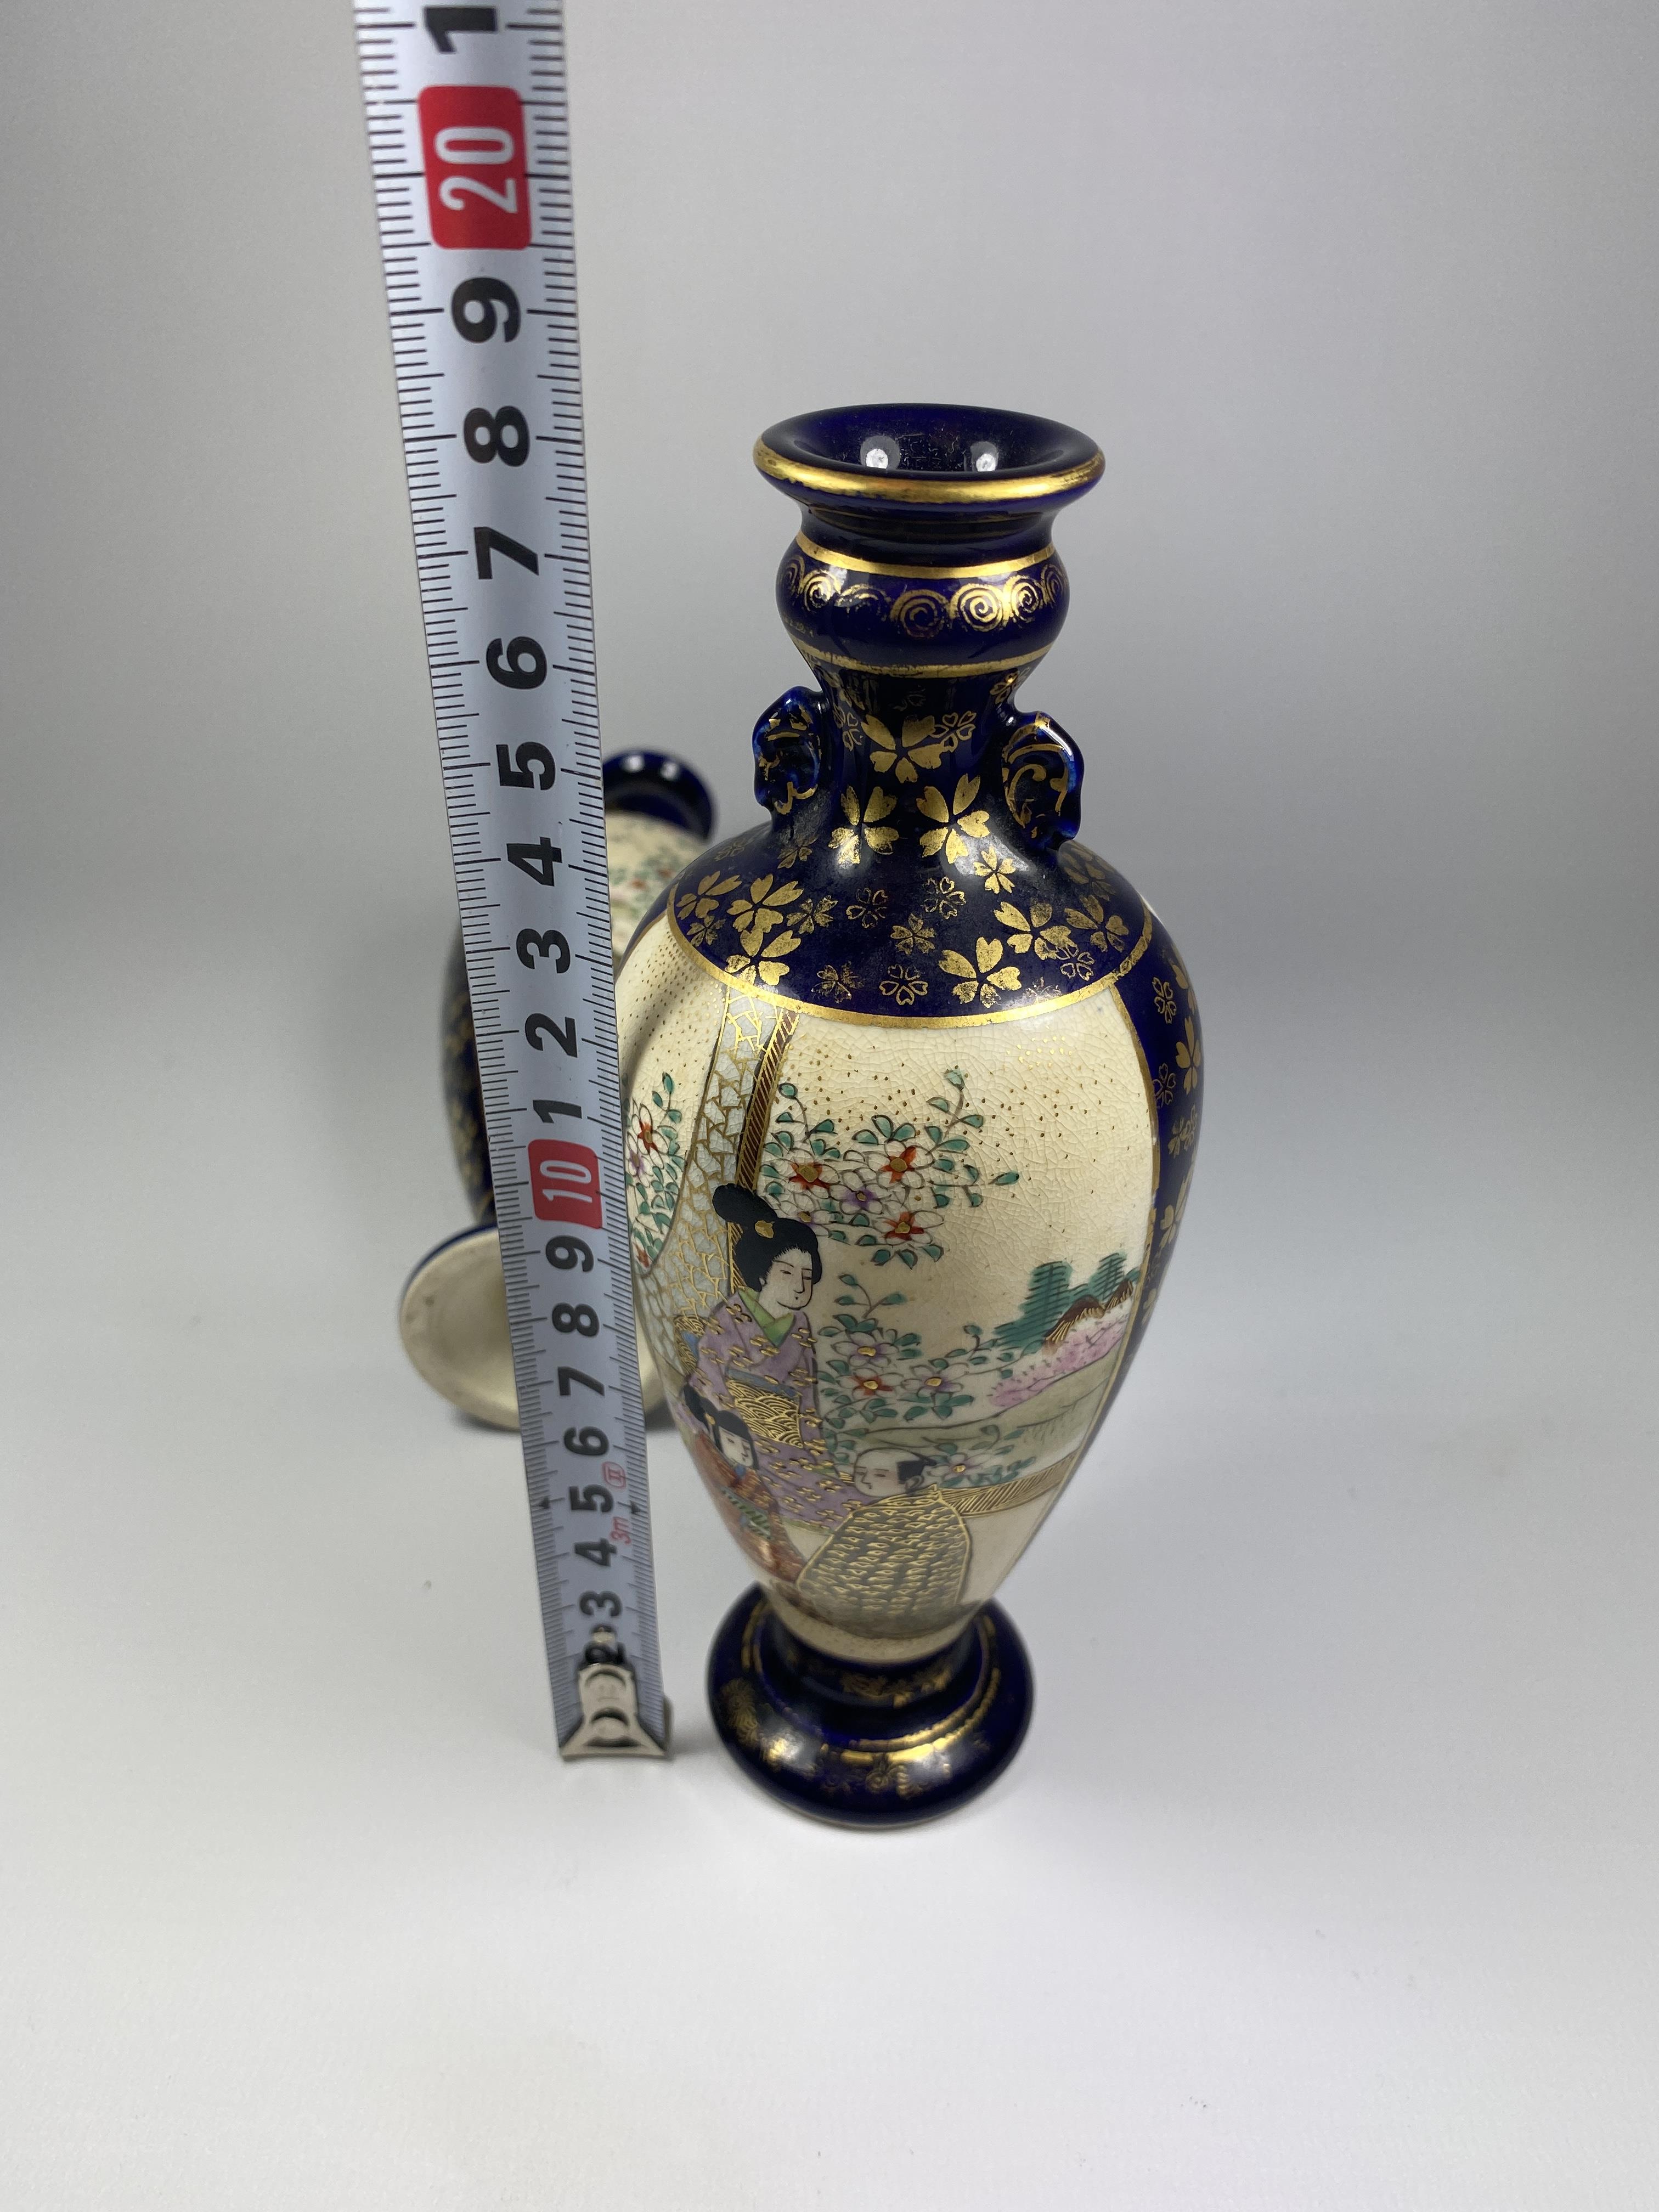 A PAIR OF JAPANESE SATSUMA MEIJI PERIOD (1868-1912) POTTERY VASES, HEIGHT 18CM - Image 5 of 5